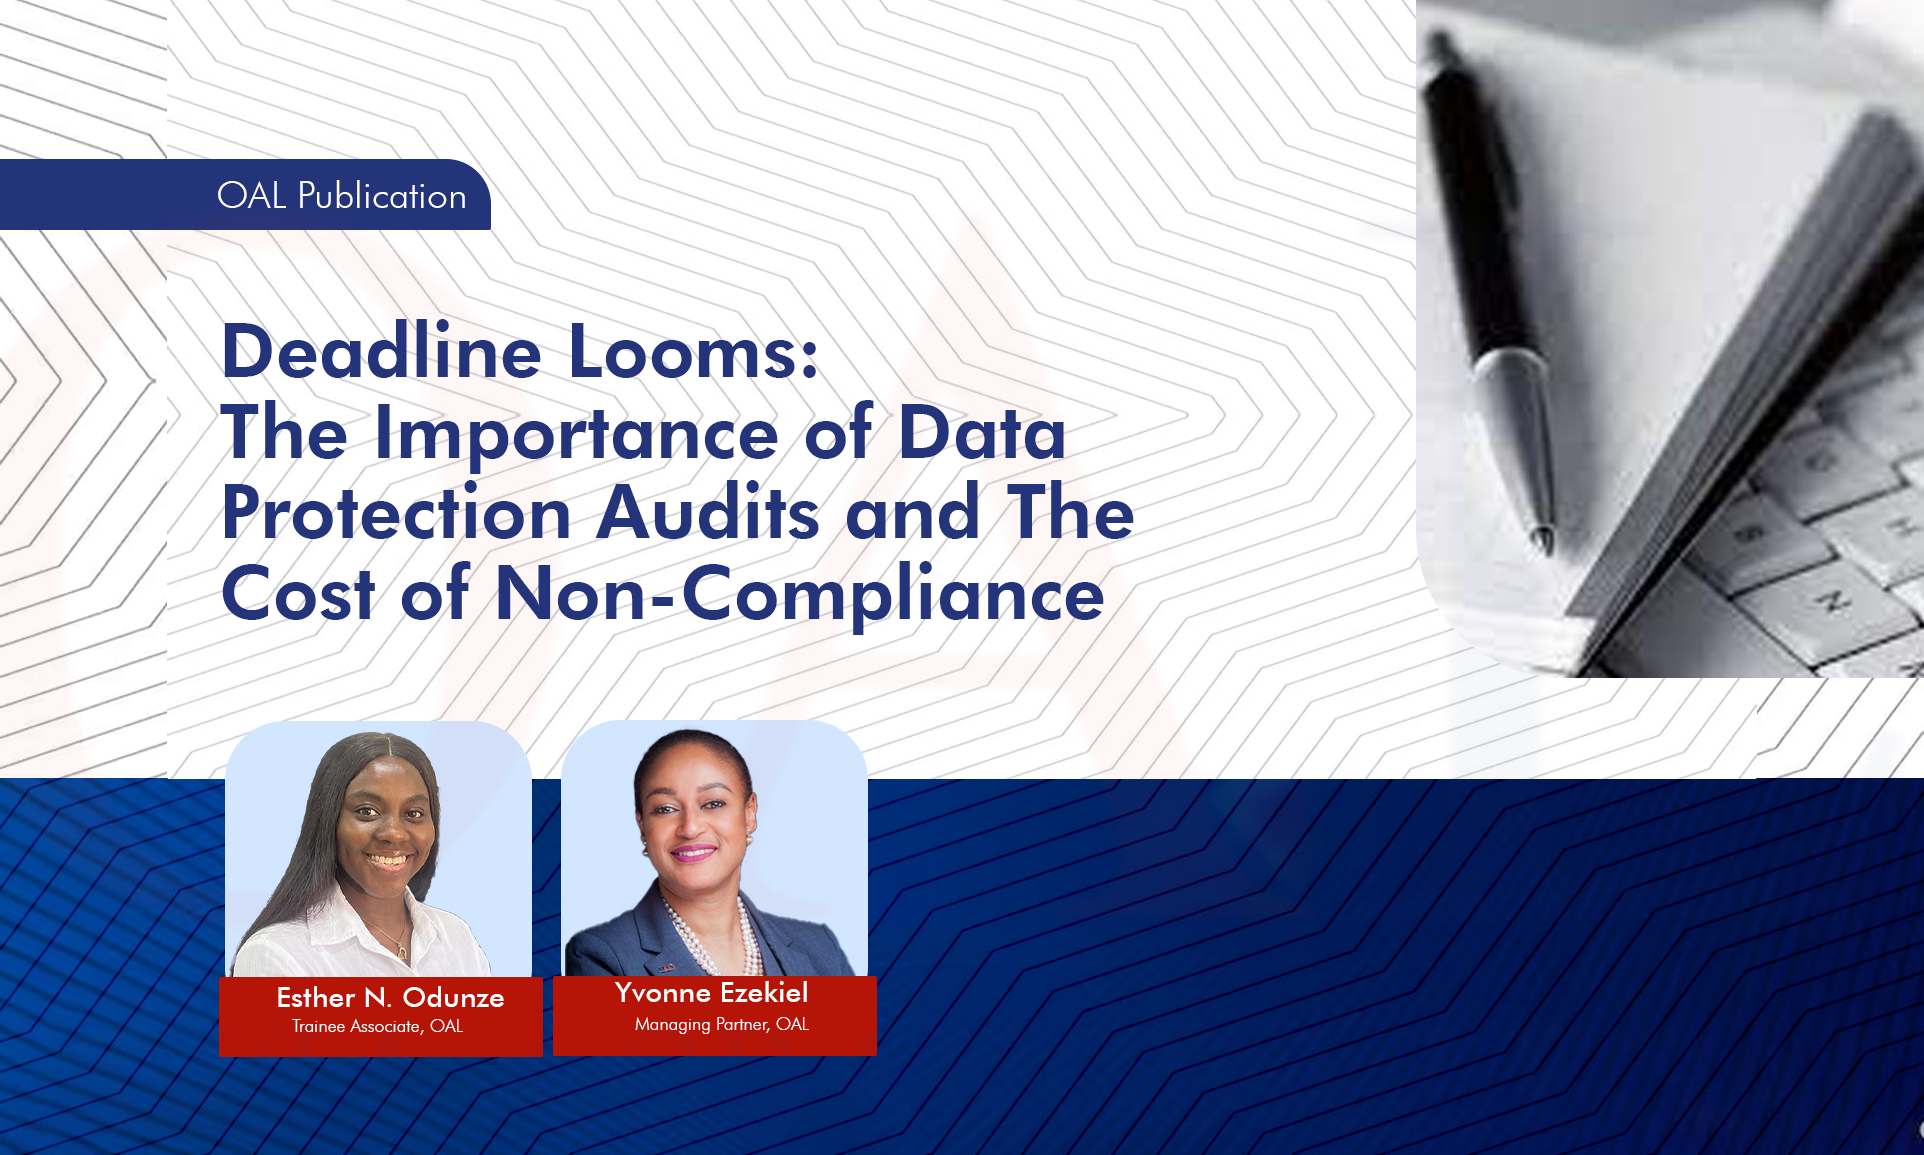 Deadline Looms: The Importance of Data Protection Audits and The Cost of Non-Compliance